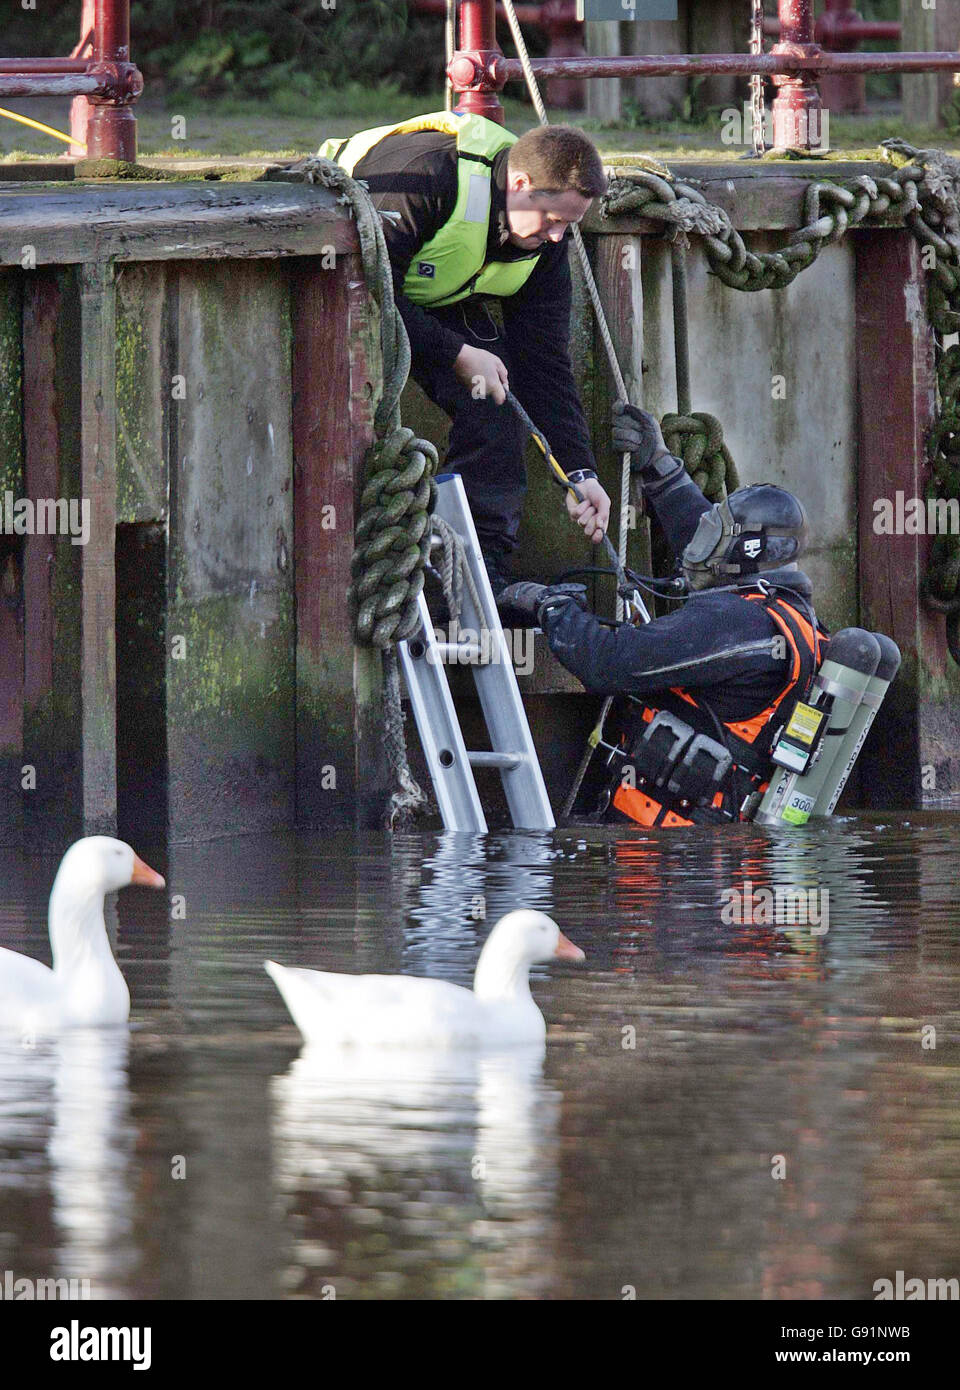 A police diving team searches the River Tees at Yarm, between Darlington and Middlesbrough, Thursday December 8, 2005, after a red Mazda suspected of having been stolen is thought to have careered into the water last night. Police say that initial indications from paint smears and tracks left at the scene are that the vehicle was driven down a flight of steps, through a barrier and into the river. See PA story POLICE River. PRESS ASSOCIATION Photo. Photo credit should read: Owen Humphreys / PA. Stock Photo